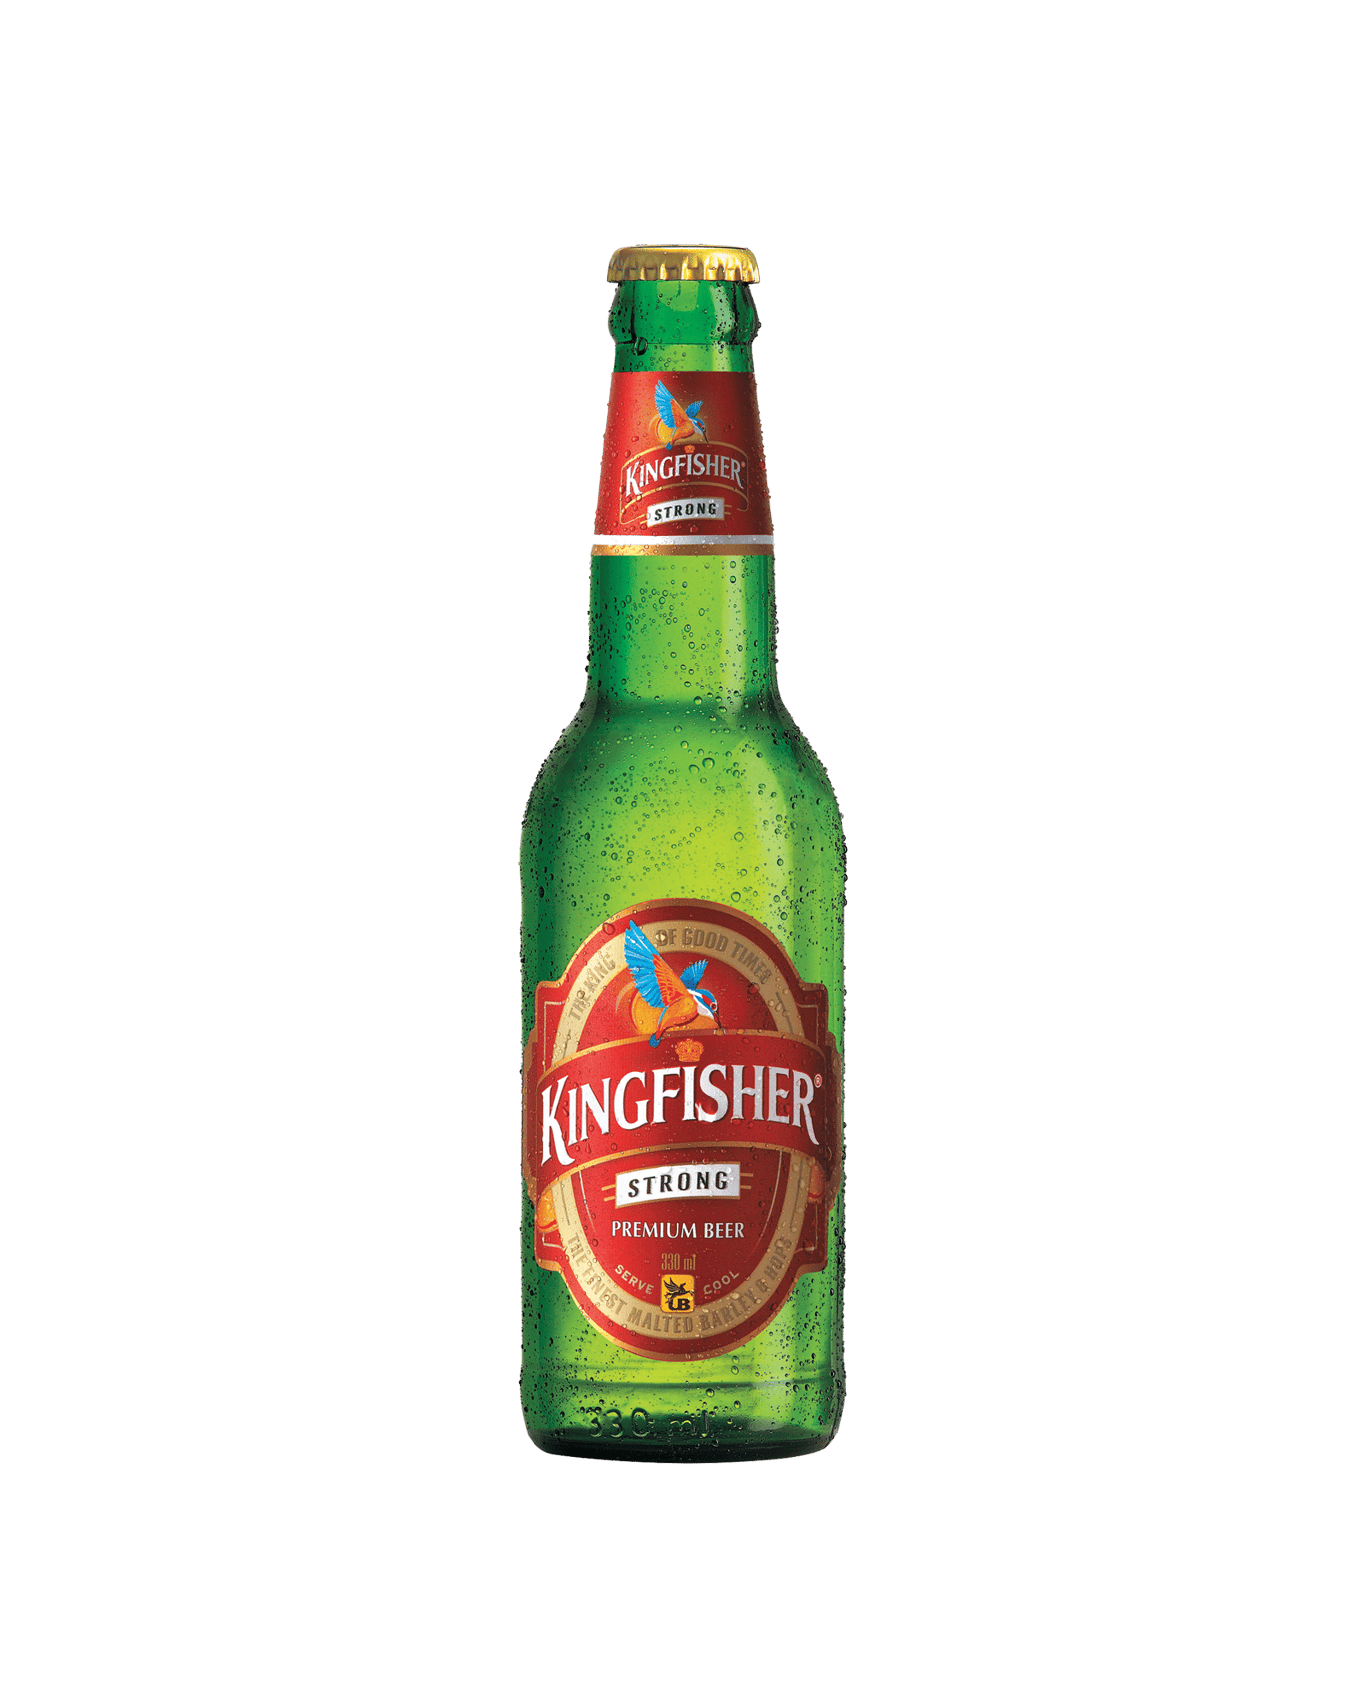 Kingfisher Beer Price: Everything You Need to Know - Bird Content